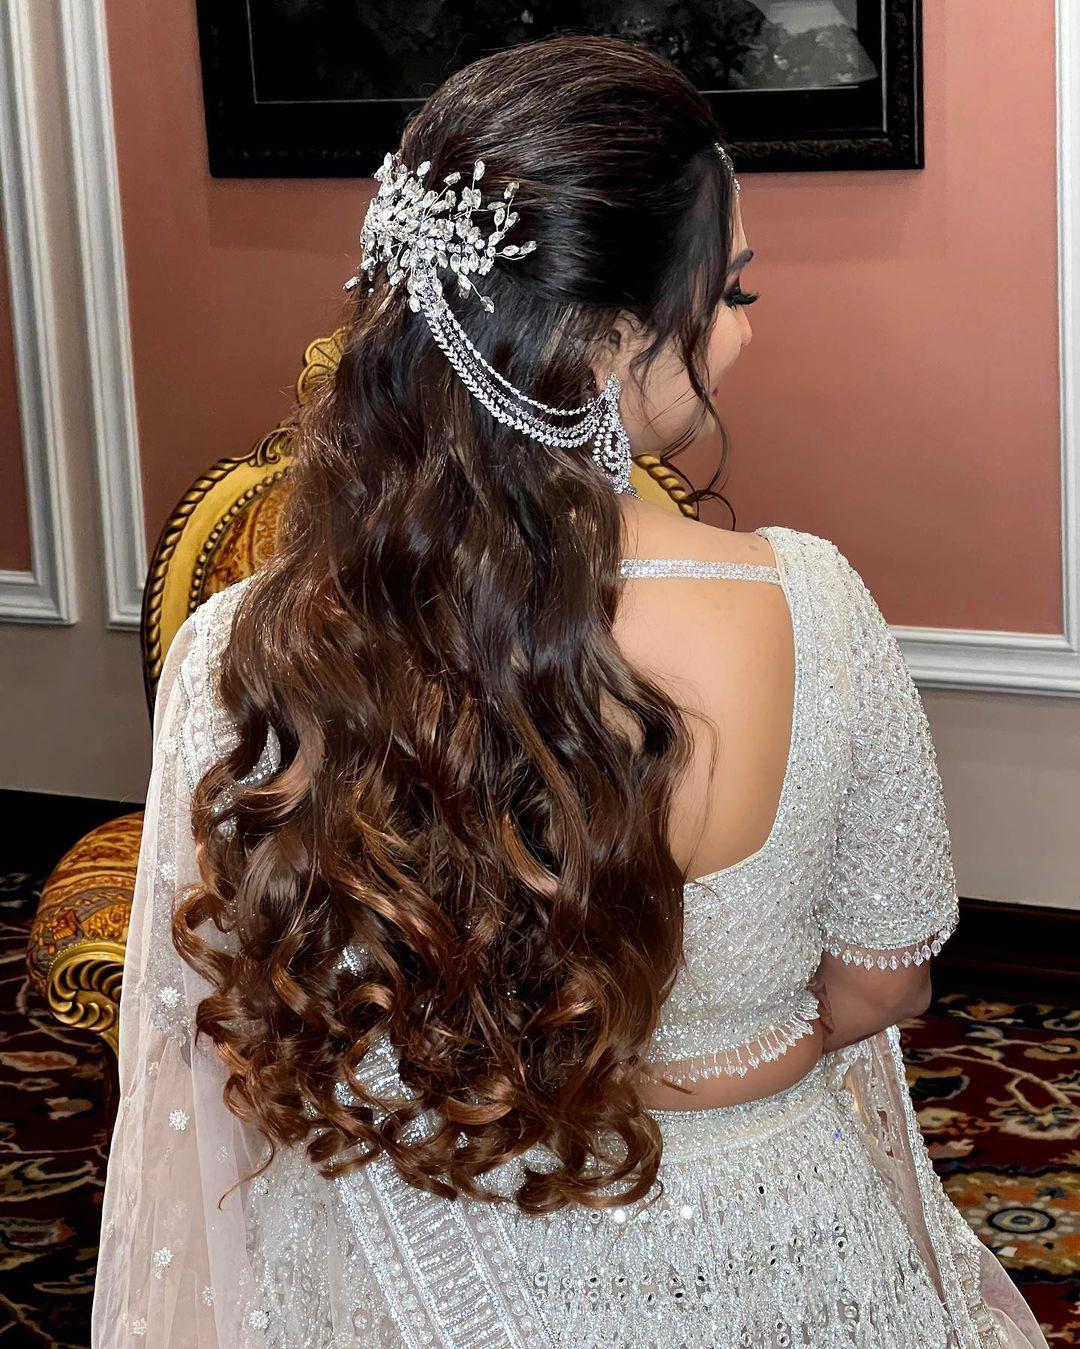 Wedding Hairstyles | Most Elegant | Super easy | Hairstyles For Mehndi,  Barat, Walima | Party Hair - YouTube